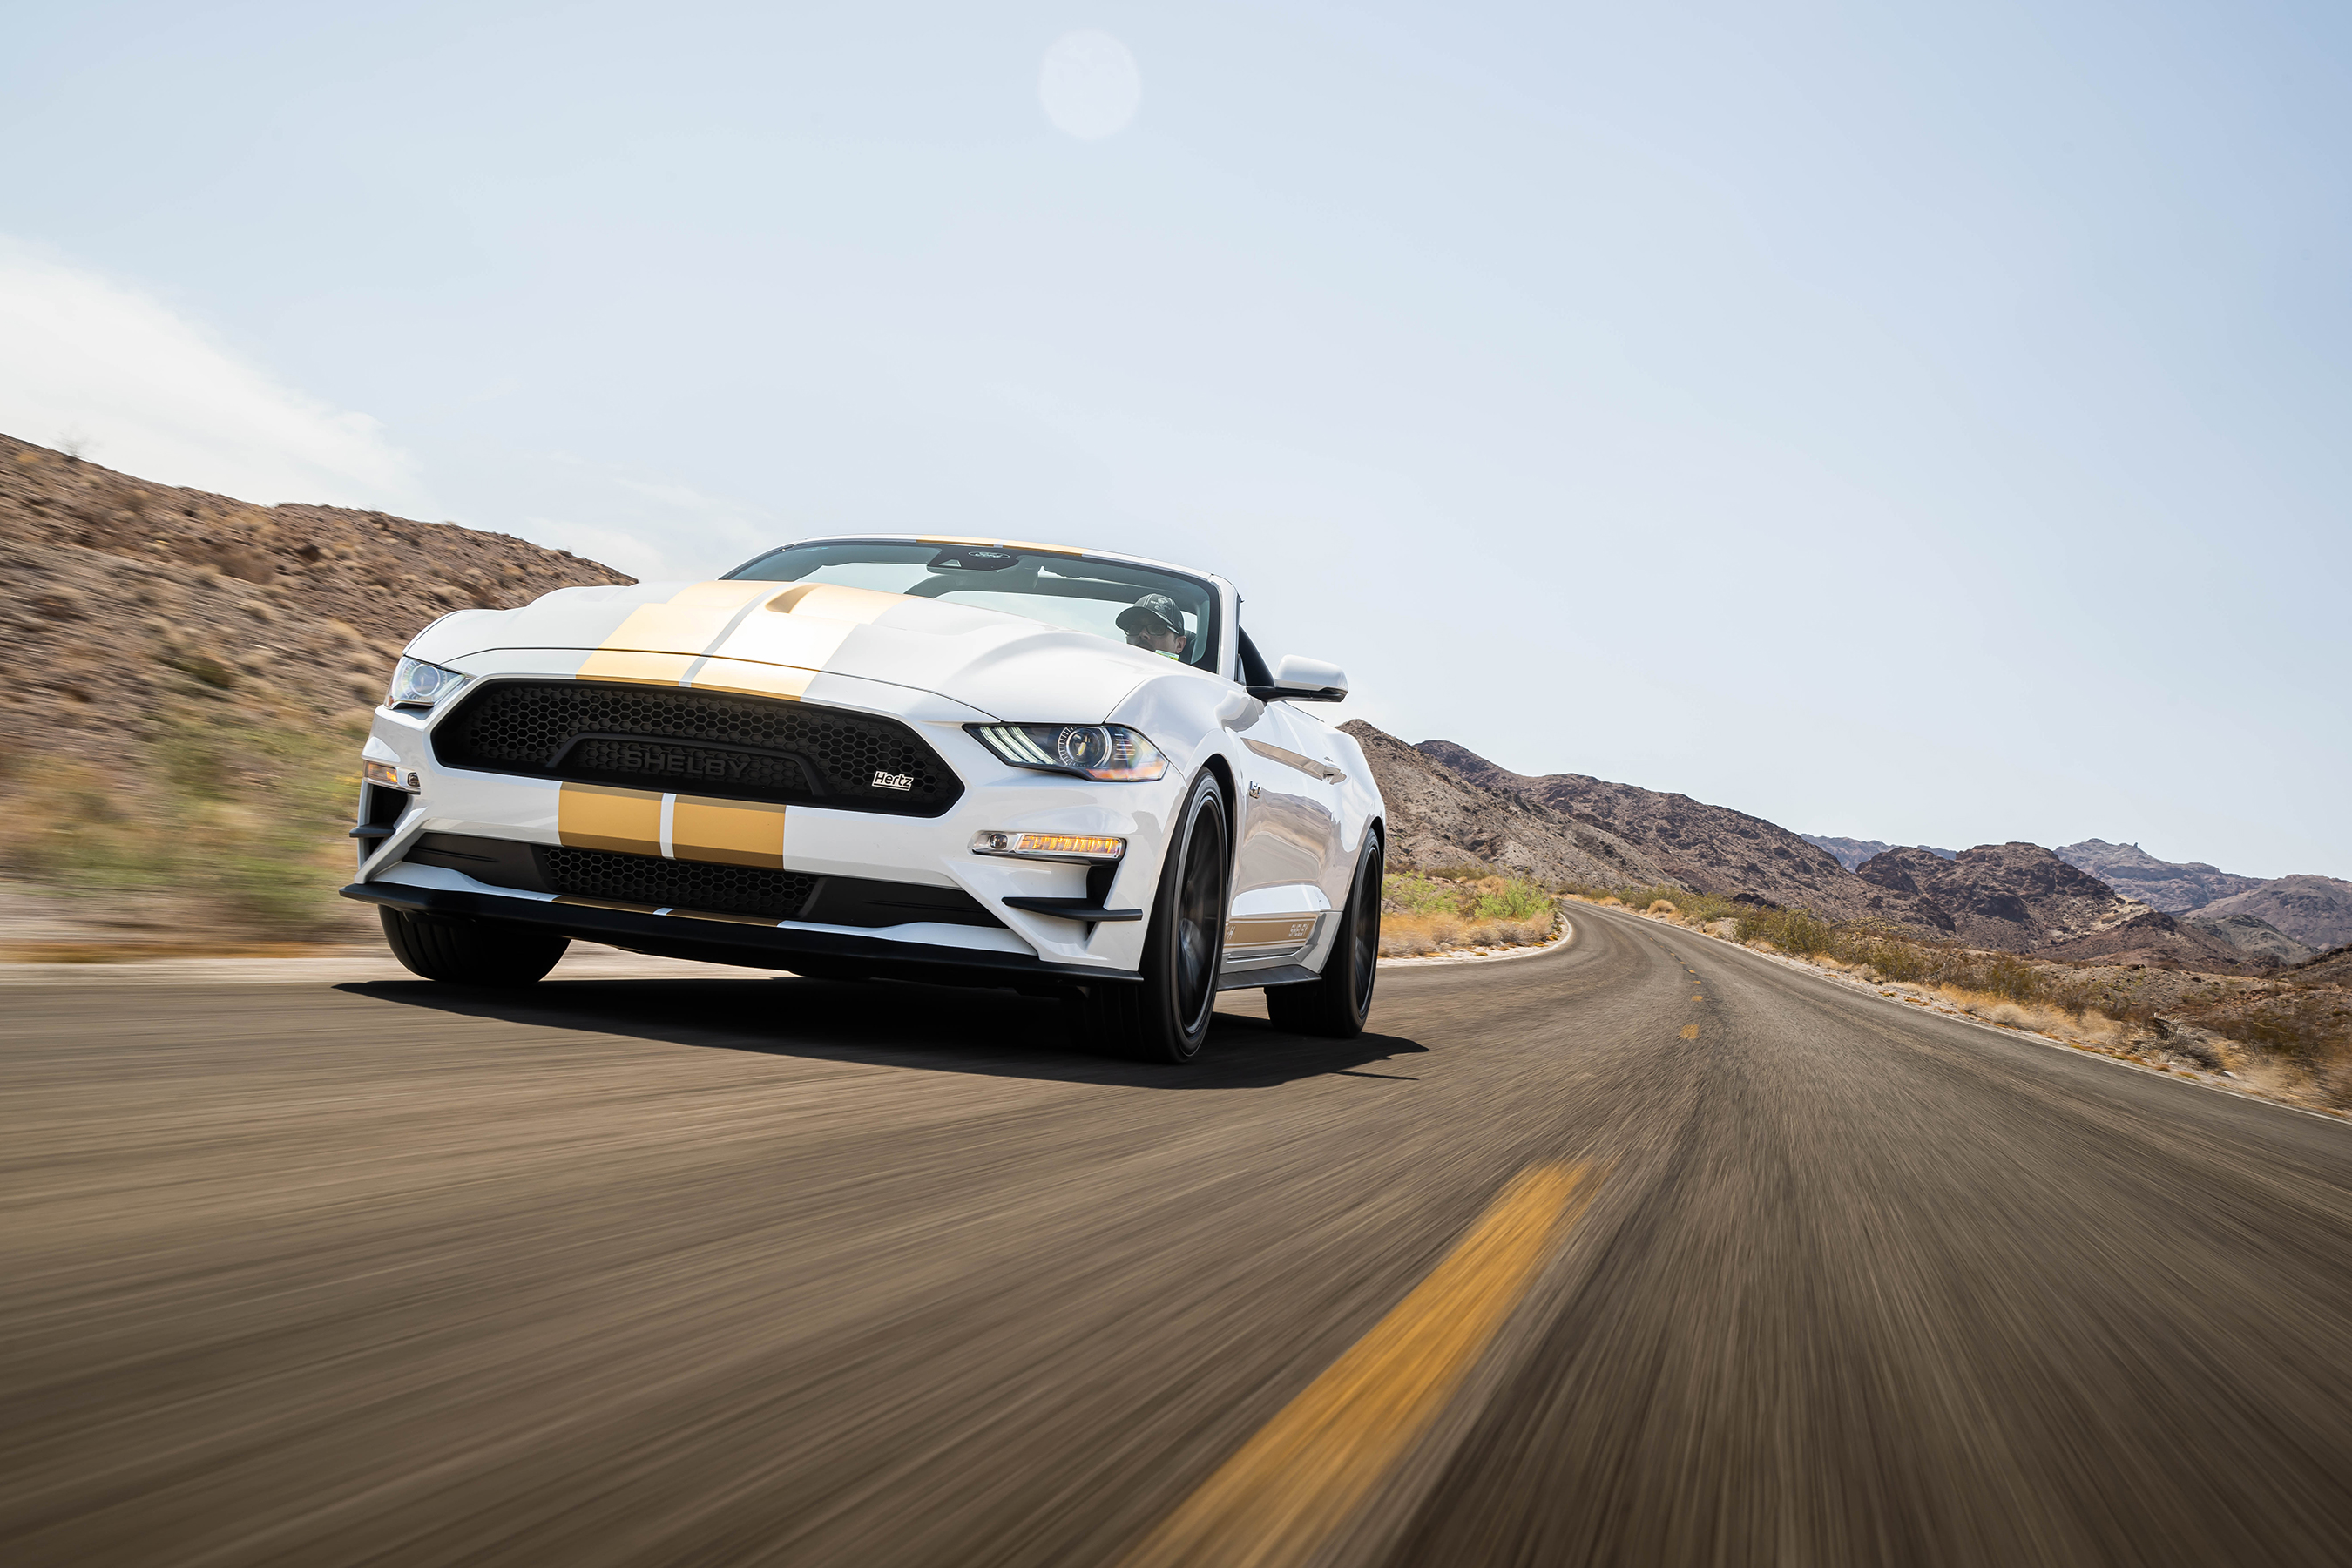 The Mustang Shelby GT-H rides on 20-inch aluminum wheels and is also fitted with a unique Shelby-designed deep-draw hood, upper grille, fascia winglets and taillight panel.